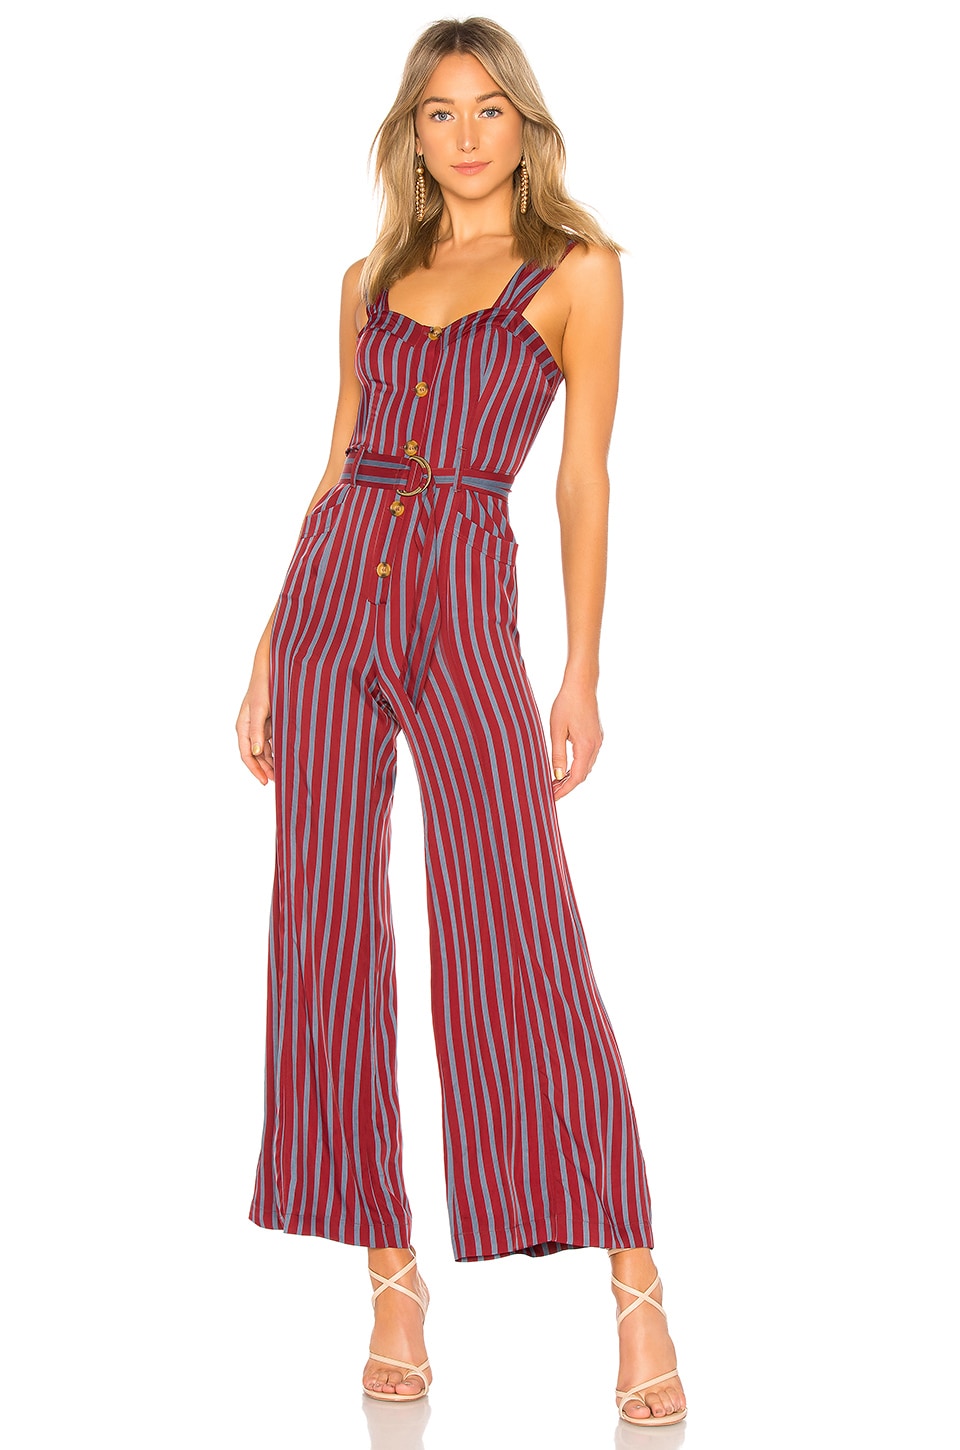 FREE PEOPLE CITY GIRL JUMPSUIT